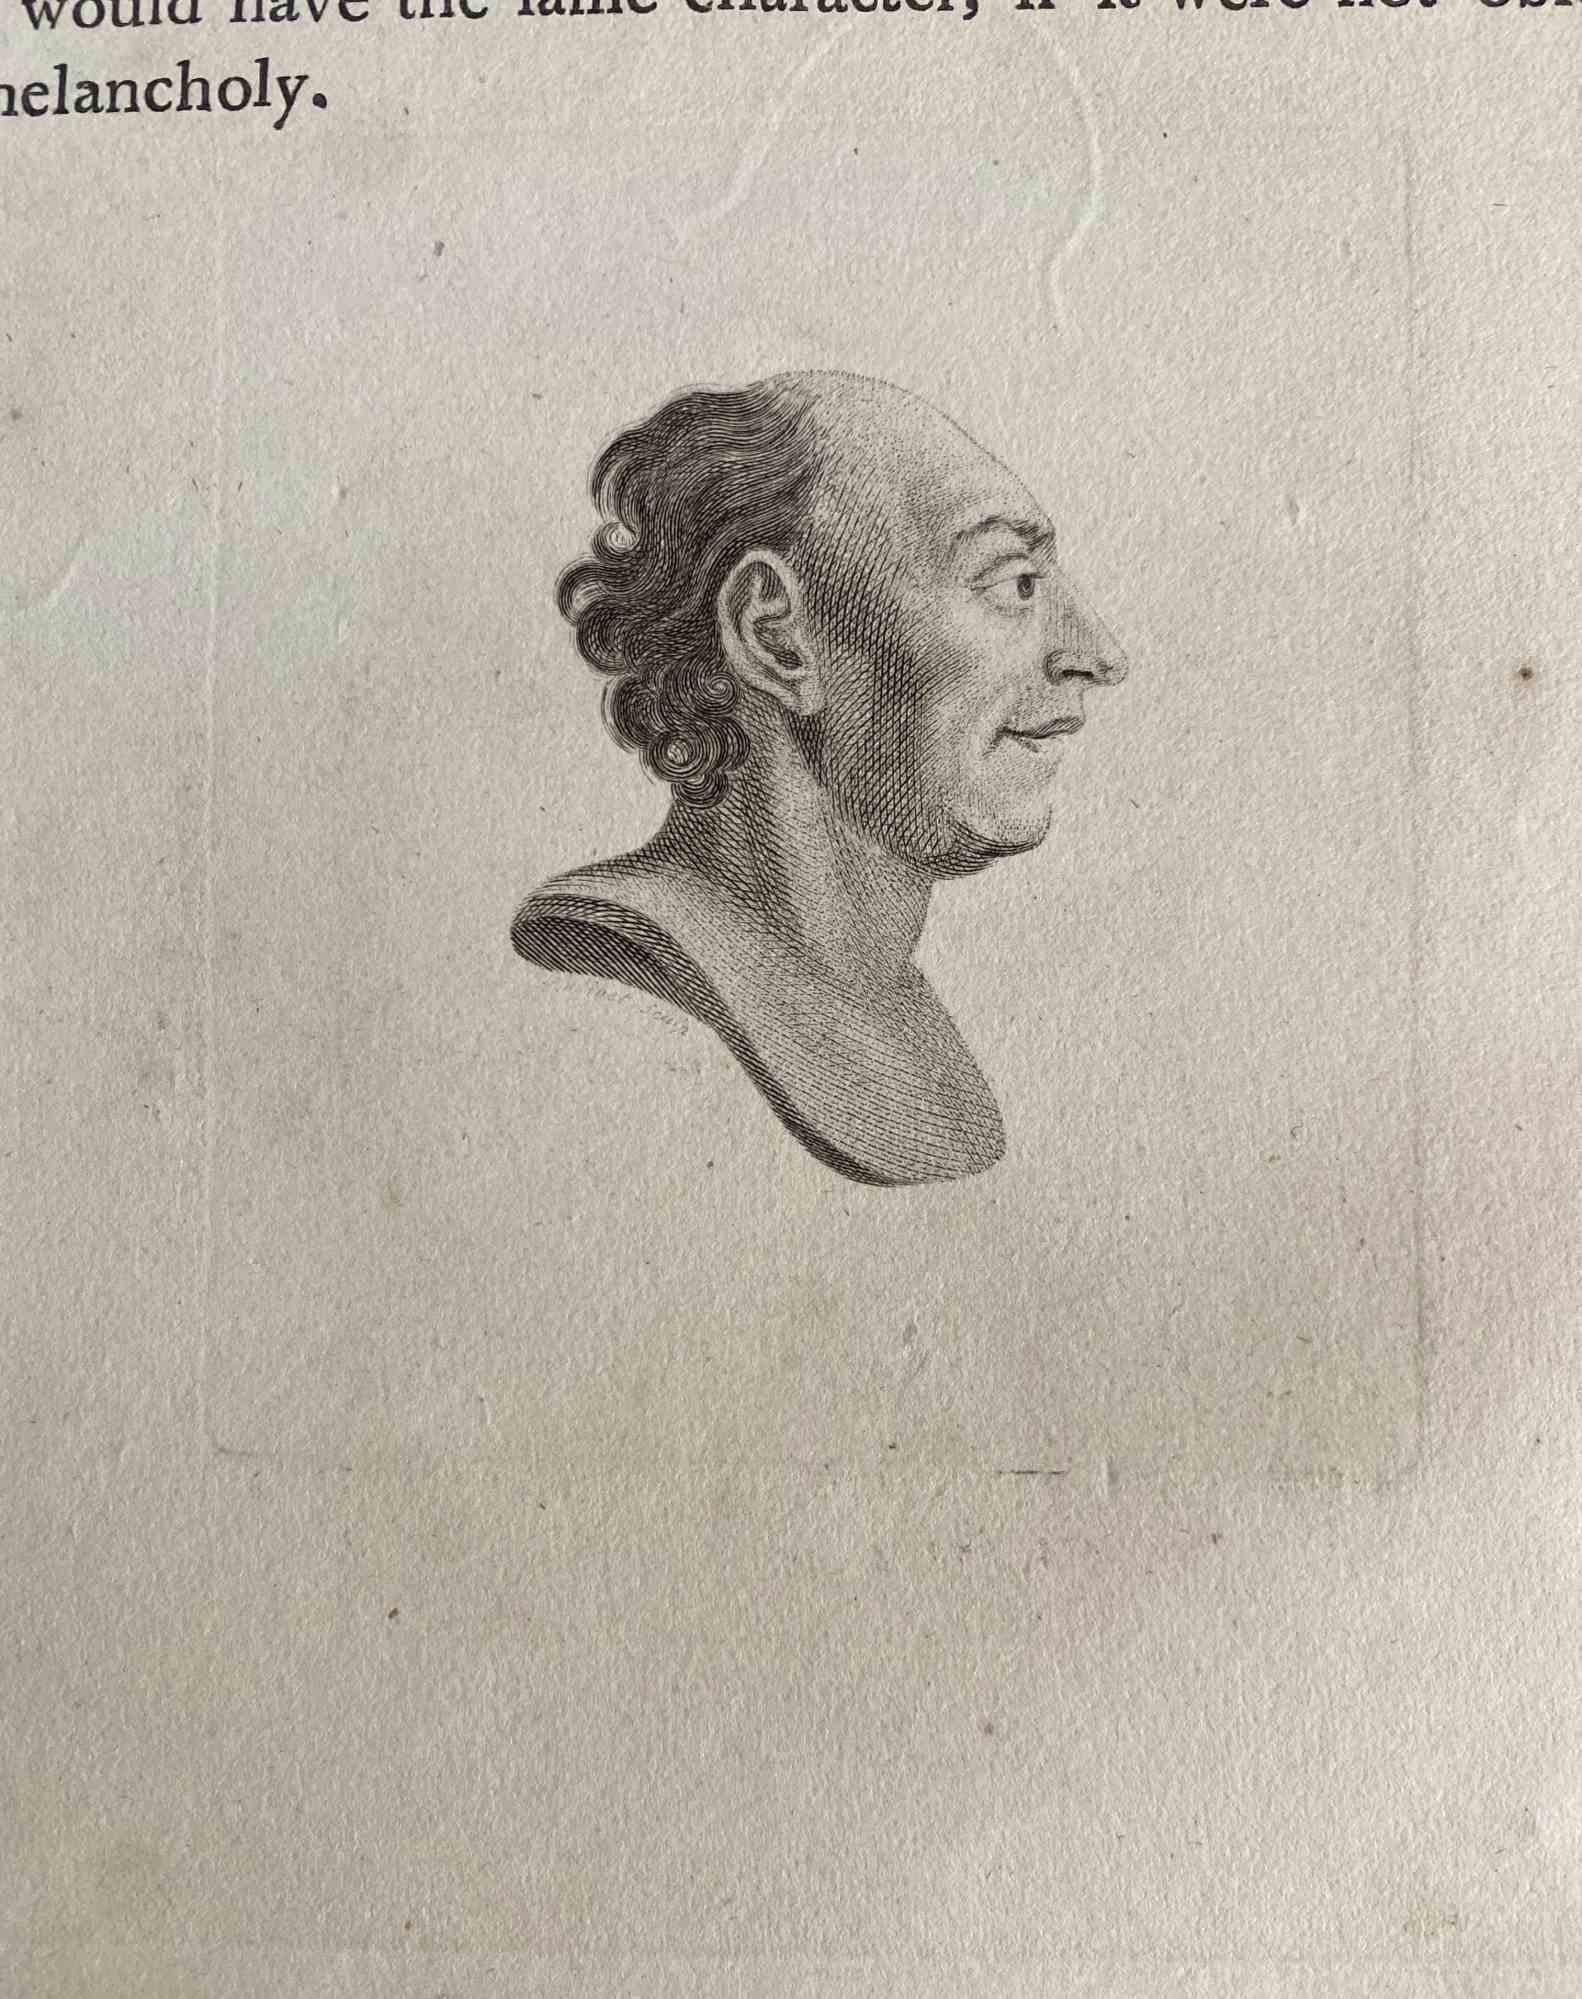 Portrait is an original artwork realized by Thomas Holloway (1748-1827).

Original Etching from J.C. Lavater's 